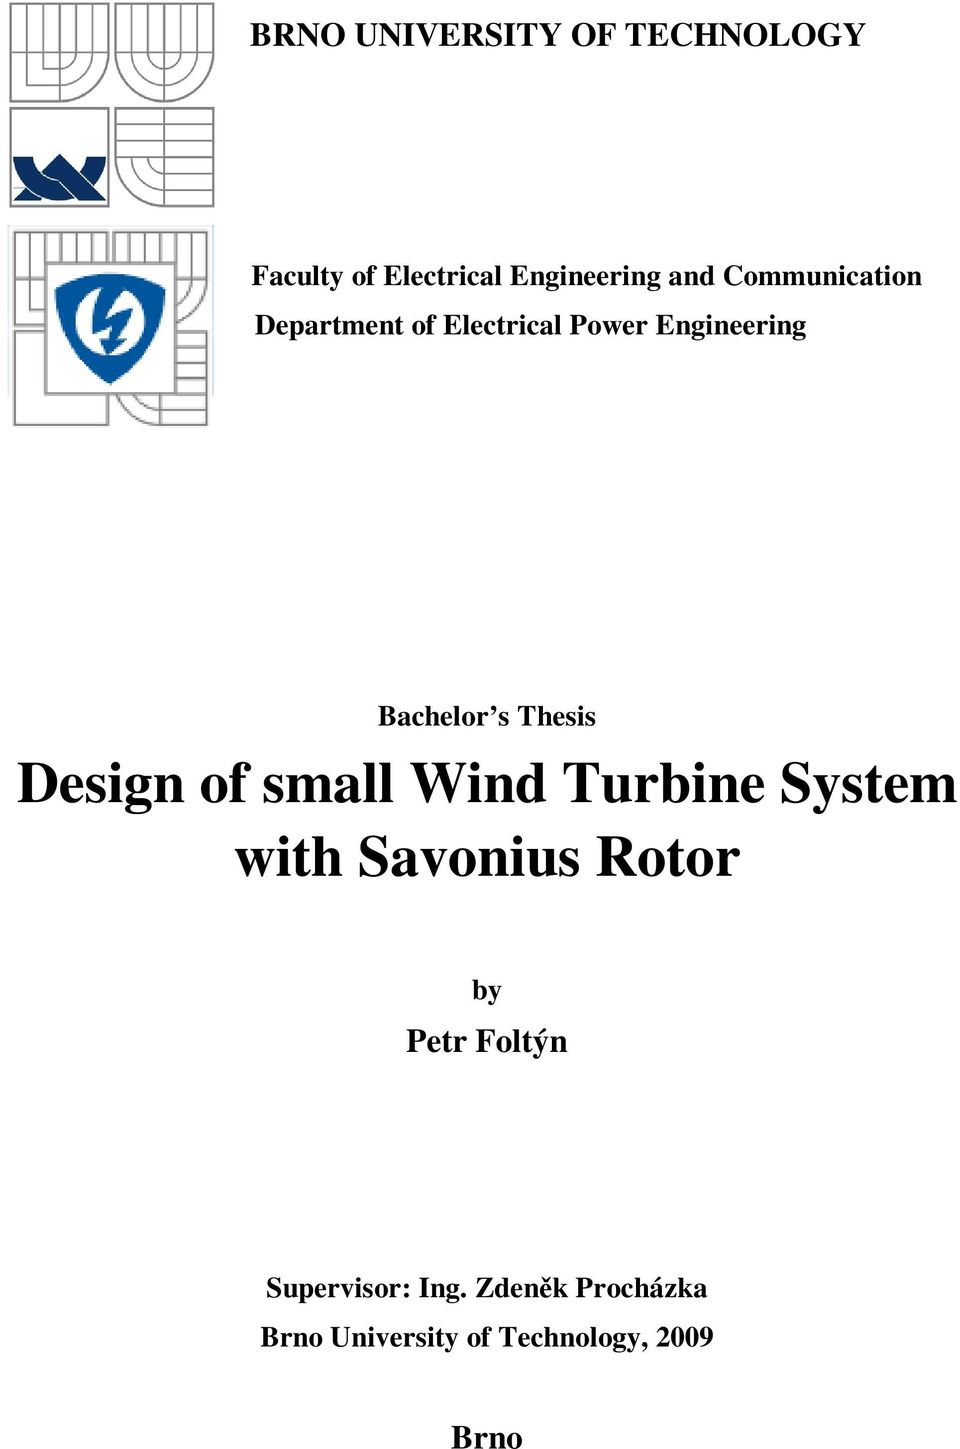 Thesis Design of small Wind Turbine System with Savonius Rotor by Petr